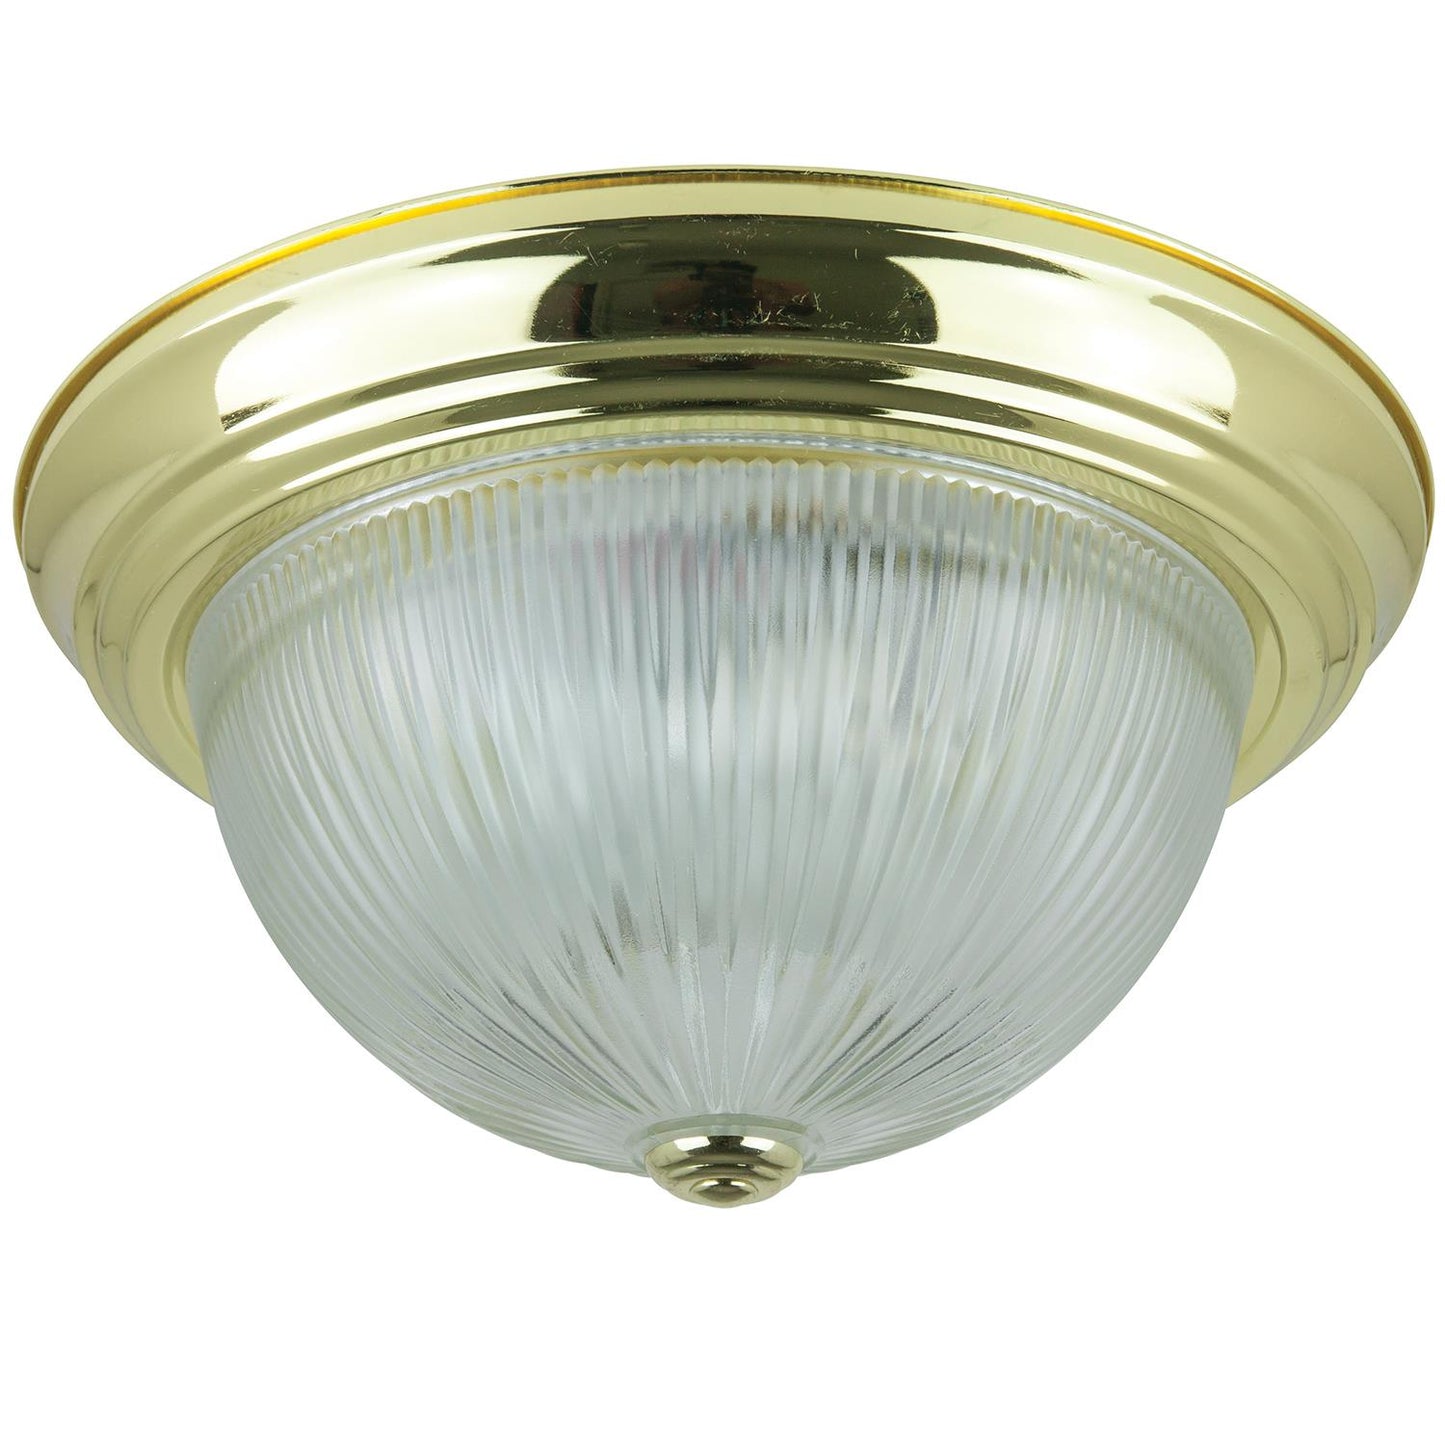 Sunlite 13" Decorative Dome Ceiling Fixture, Polished Brass Finish, Clear Glass